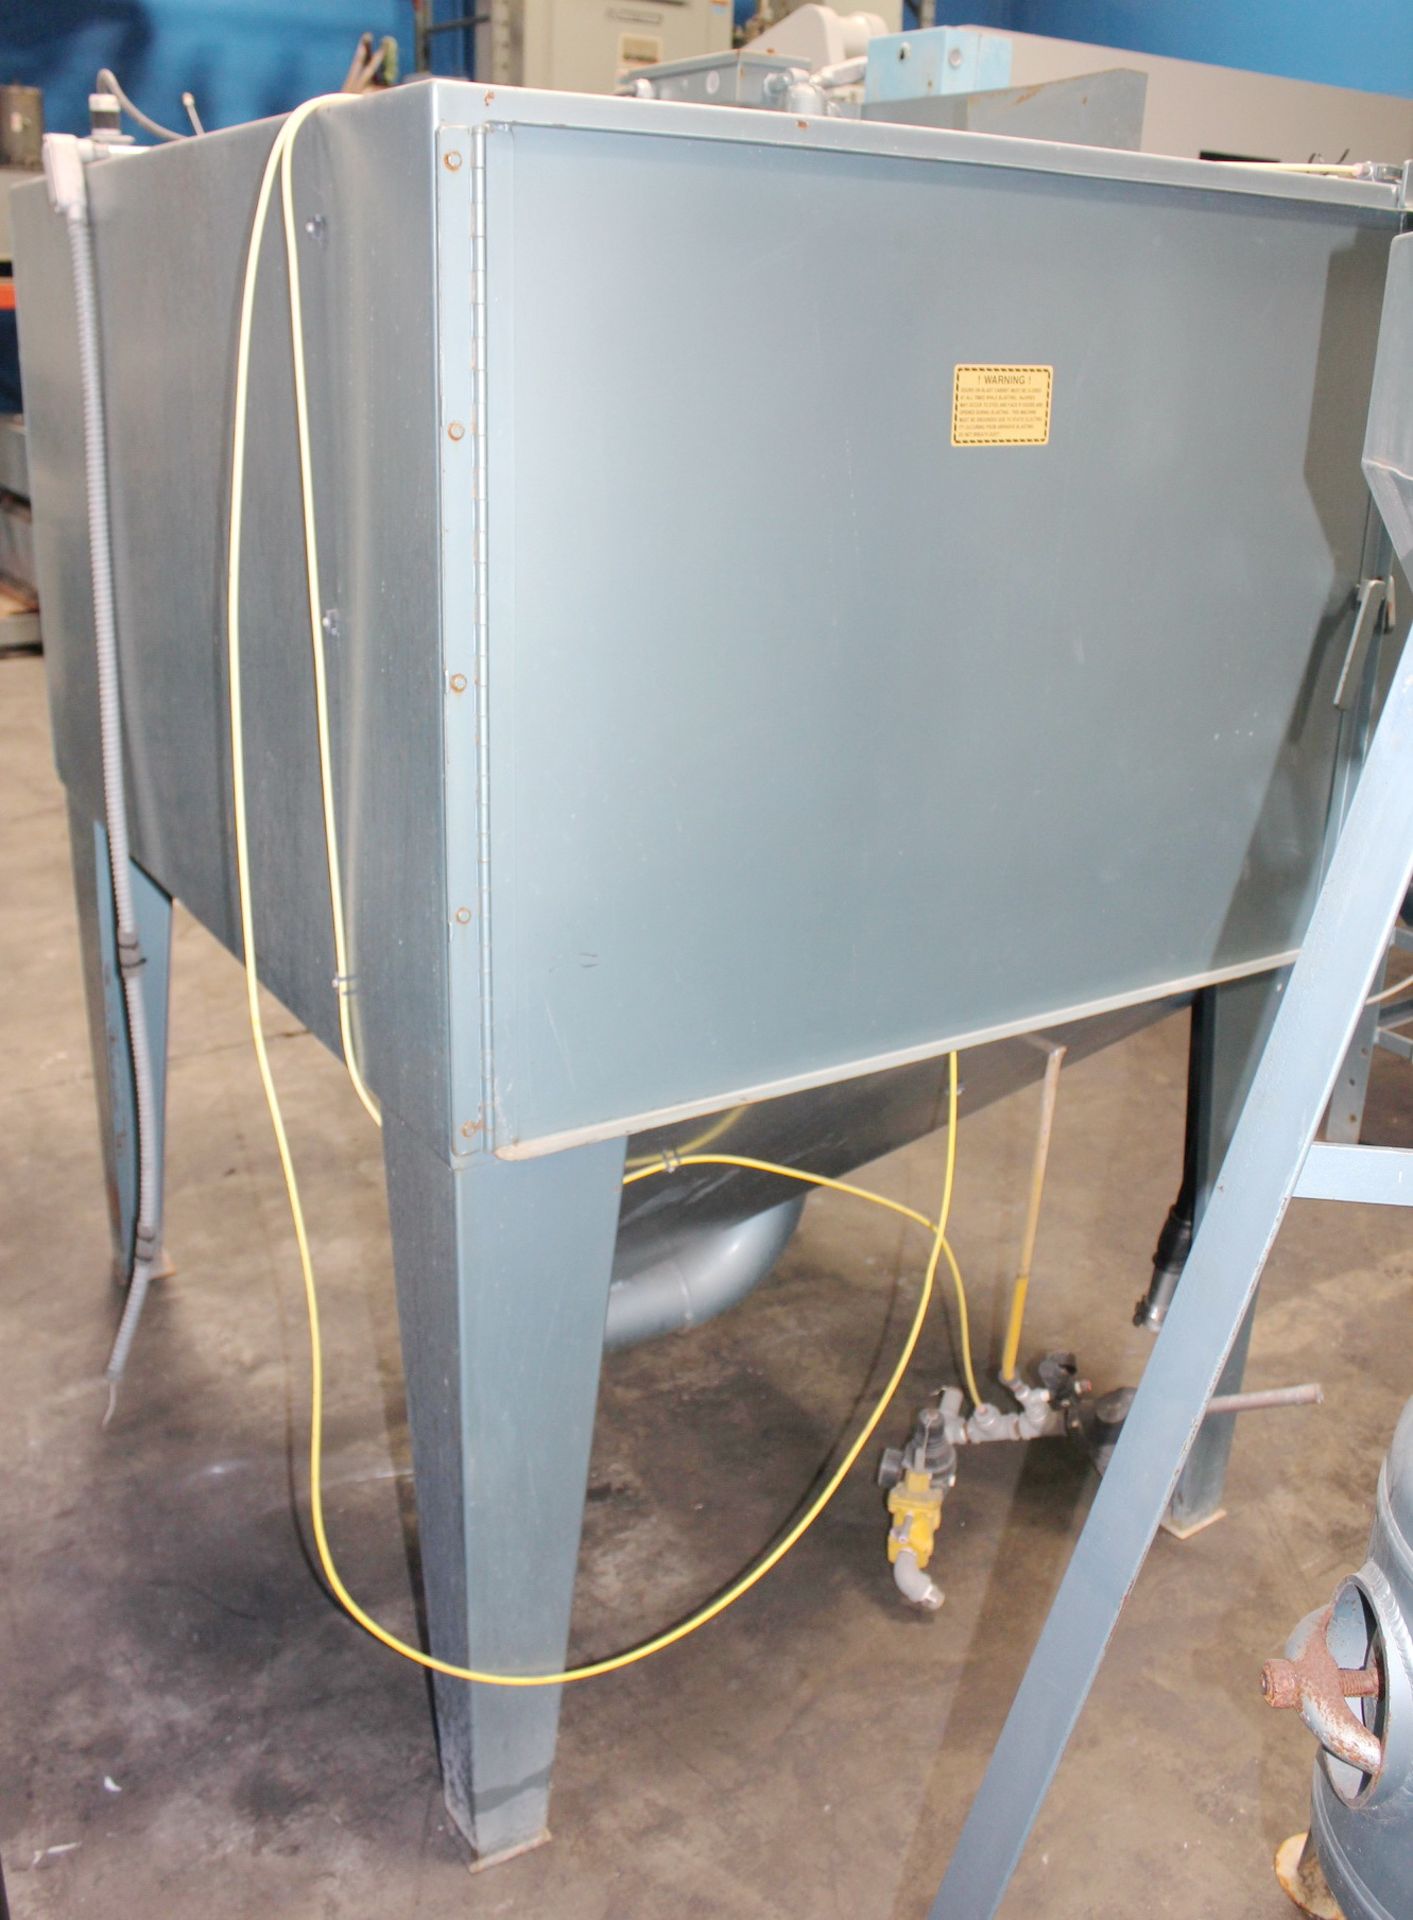 Universal Suction Type Blast Cabinet & Dust Collector | 60" x 48" x 36", Mdl: 60x48x36PDH-DC200, S/ - Image 9 of 20